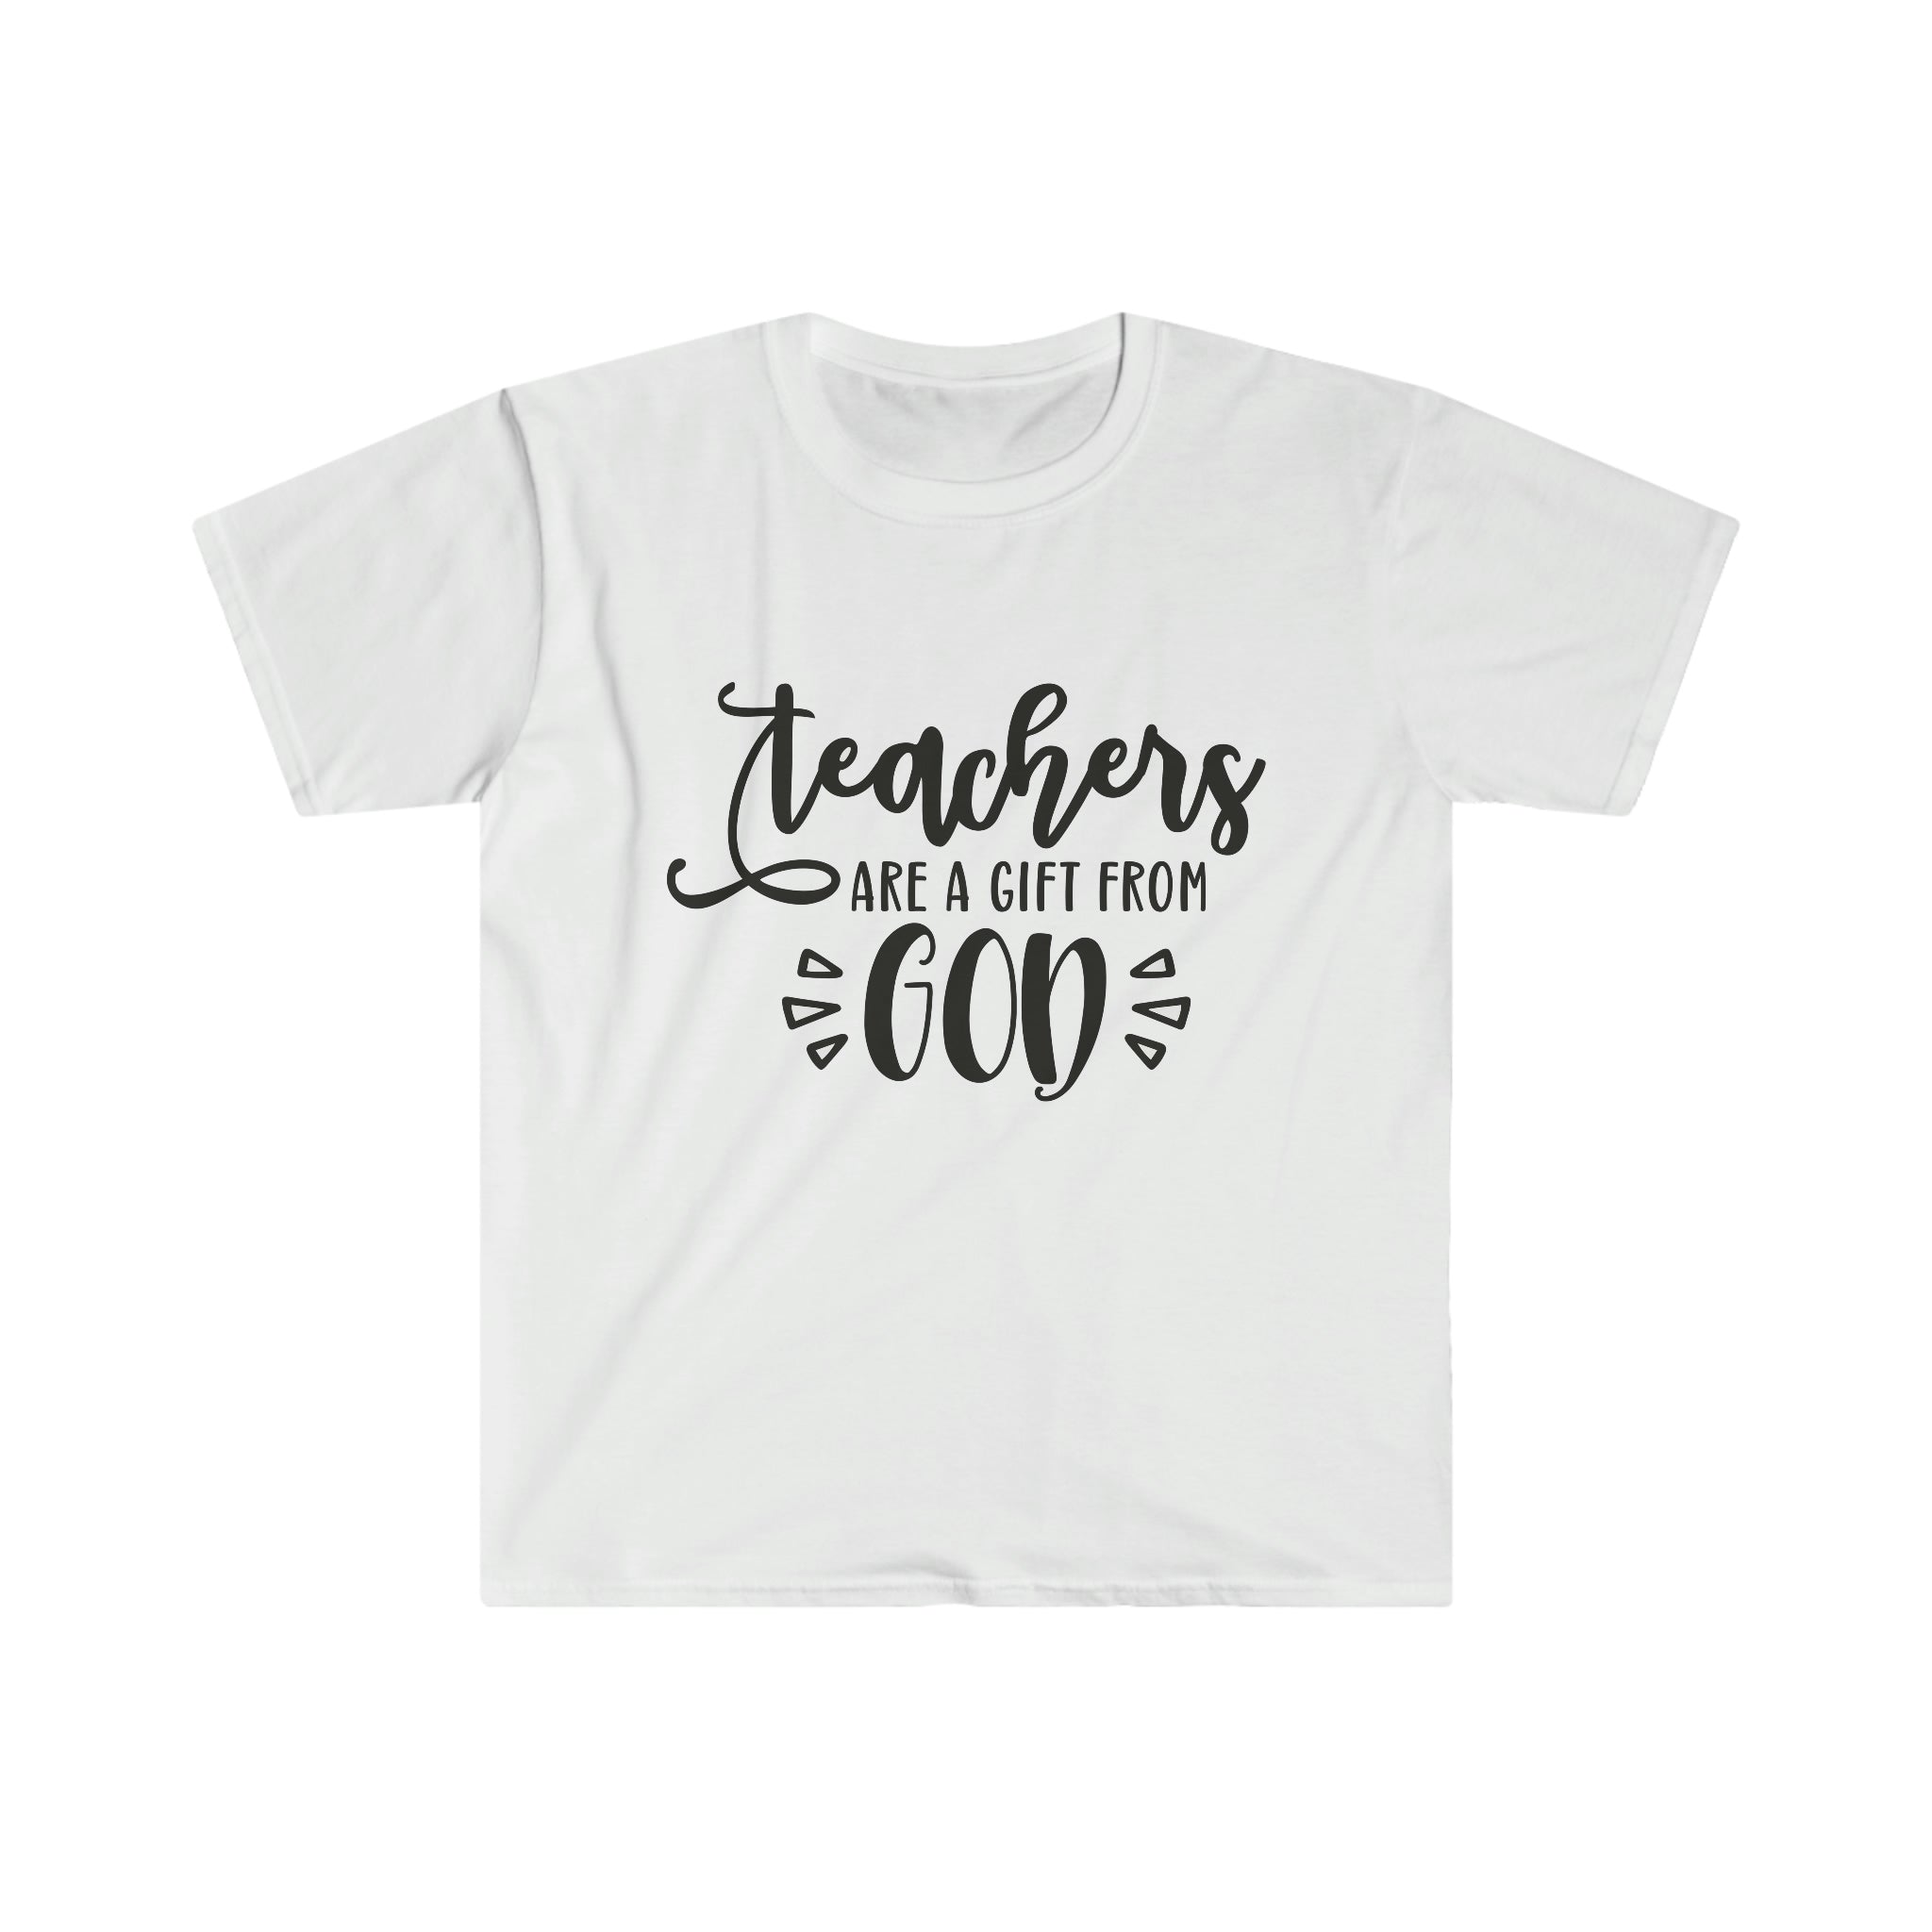 A "Teachers are a Gift From God T-Shirt" that is a perfect gift for teachers.